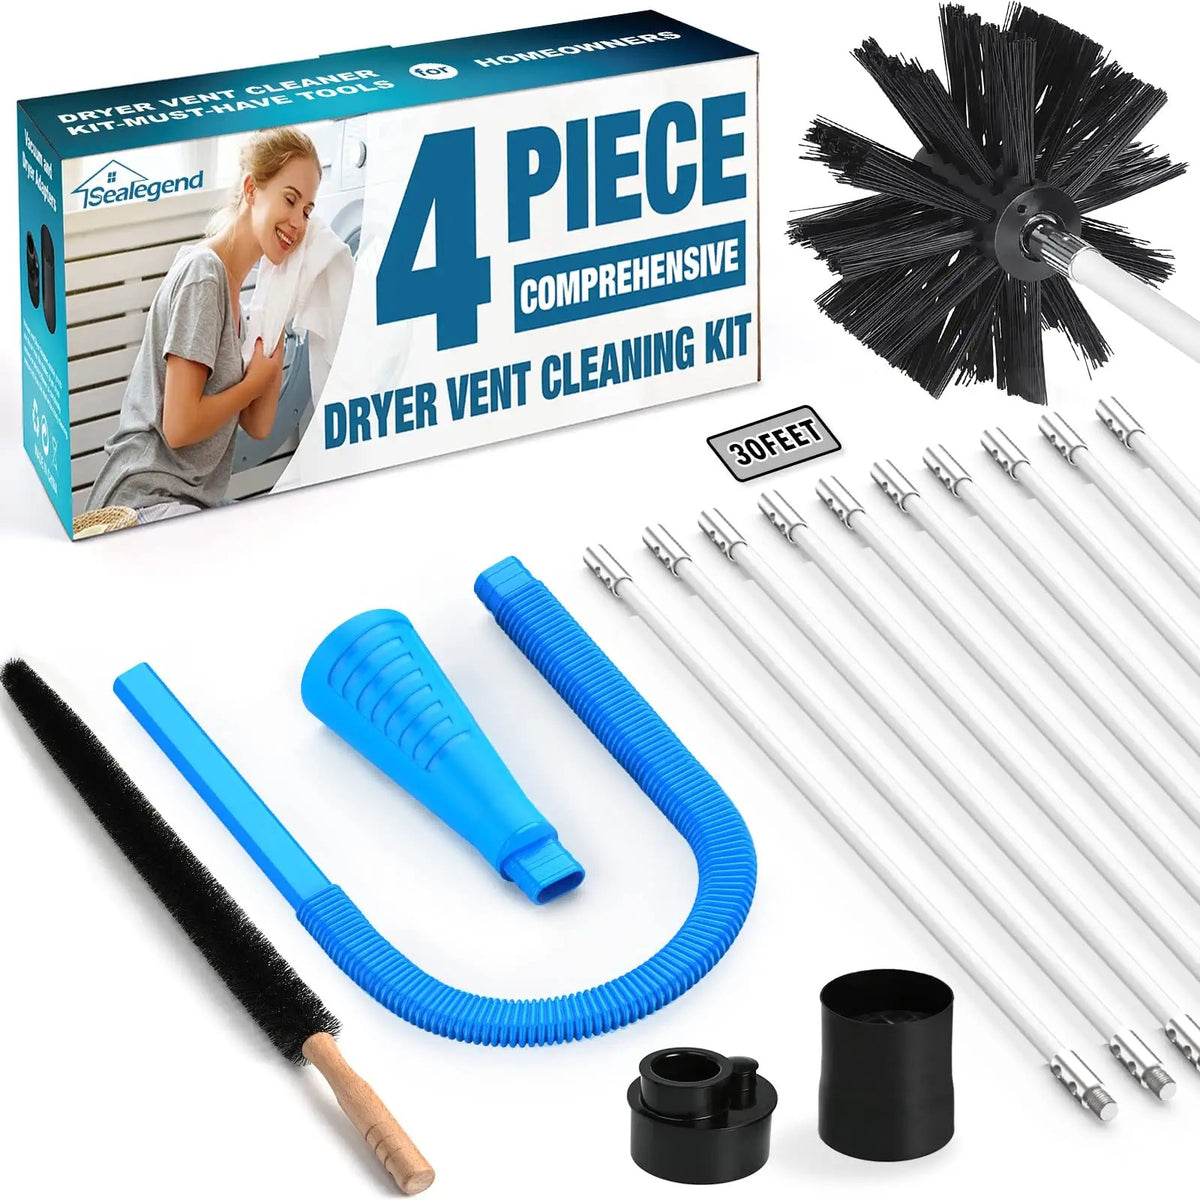 Sealegend 30 FEET Dryer Vent Cleaner Kit Flexible Quick Snap Brush with  Drill Attachment Extend up to 30 FEET for Easy Cleaning Upgraded Dryer Vent